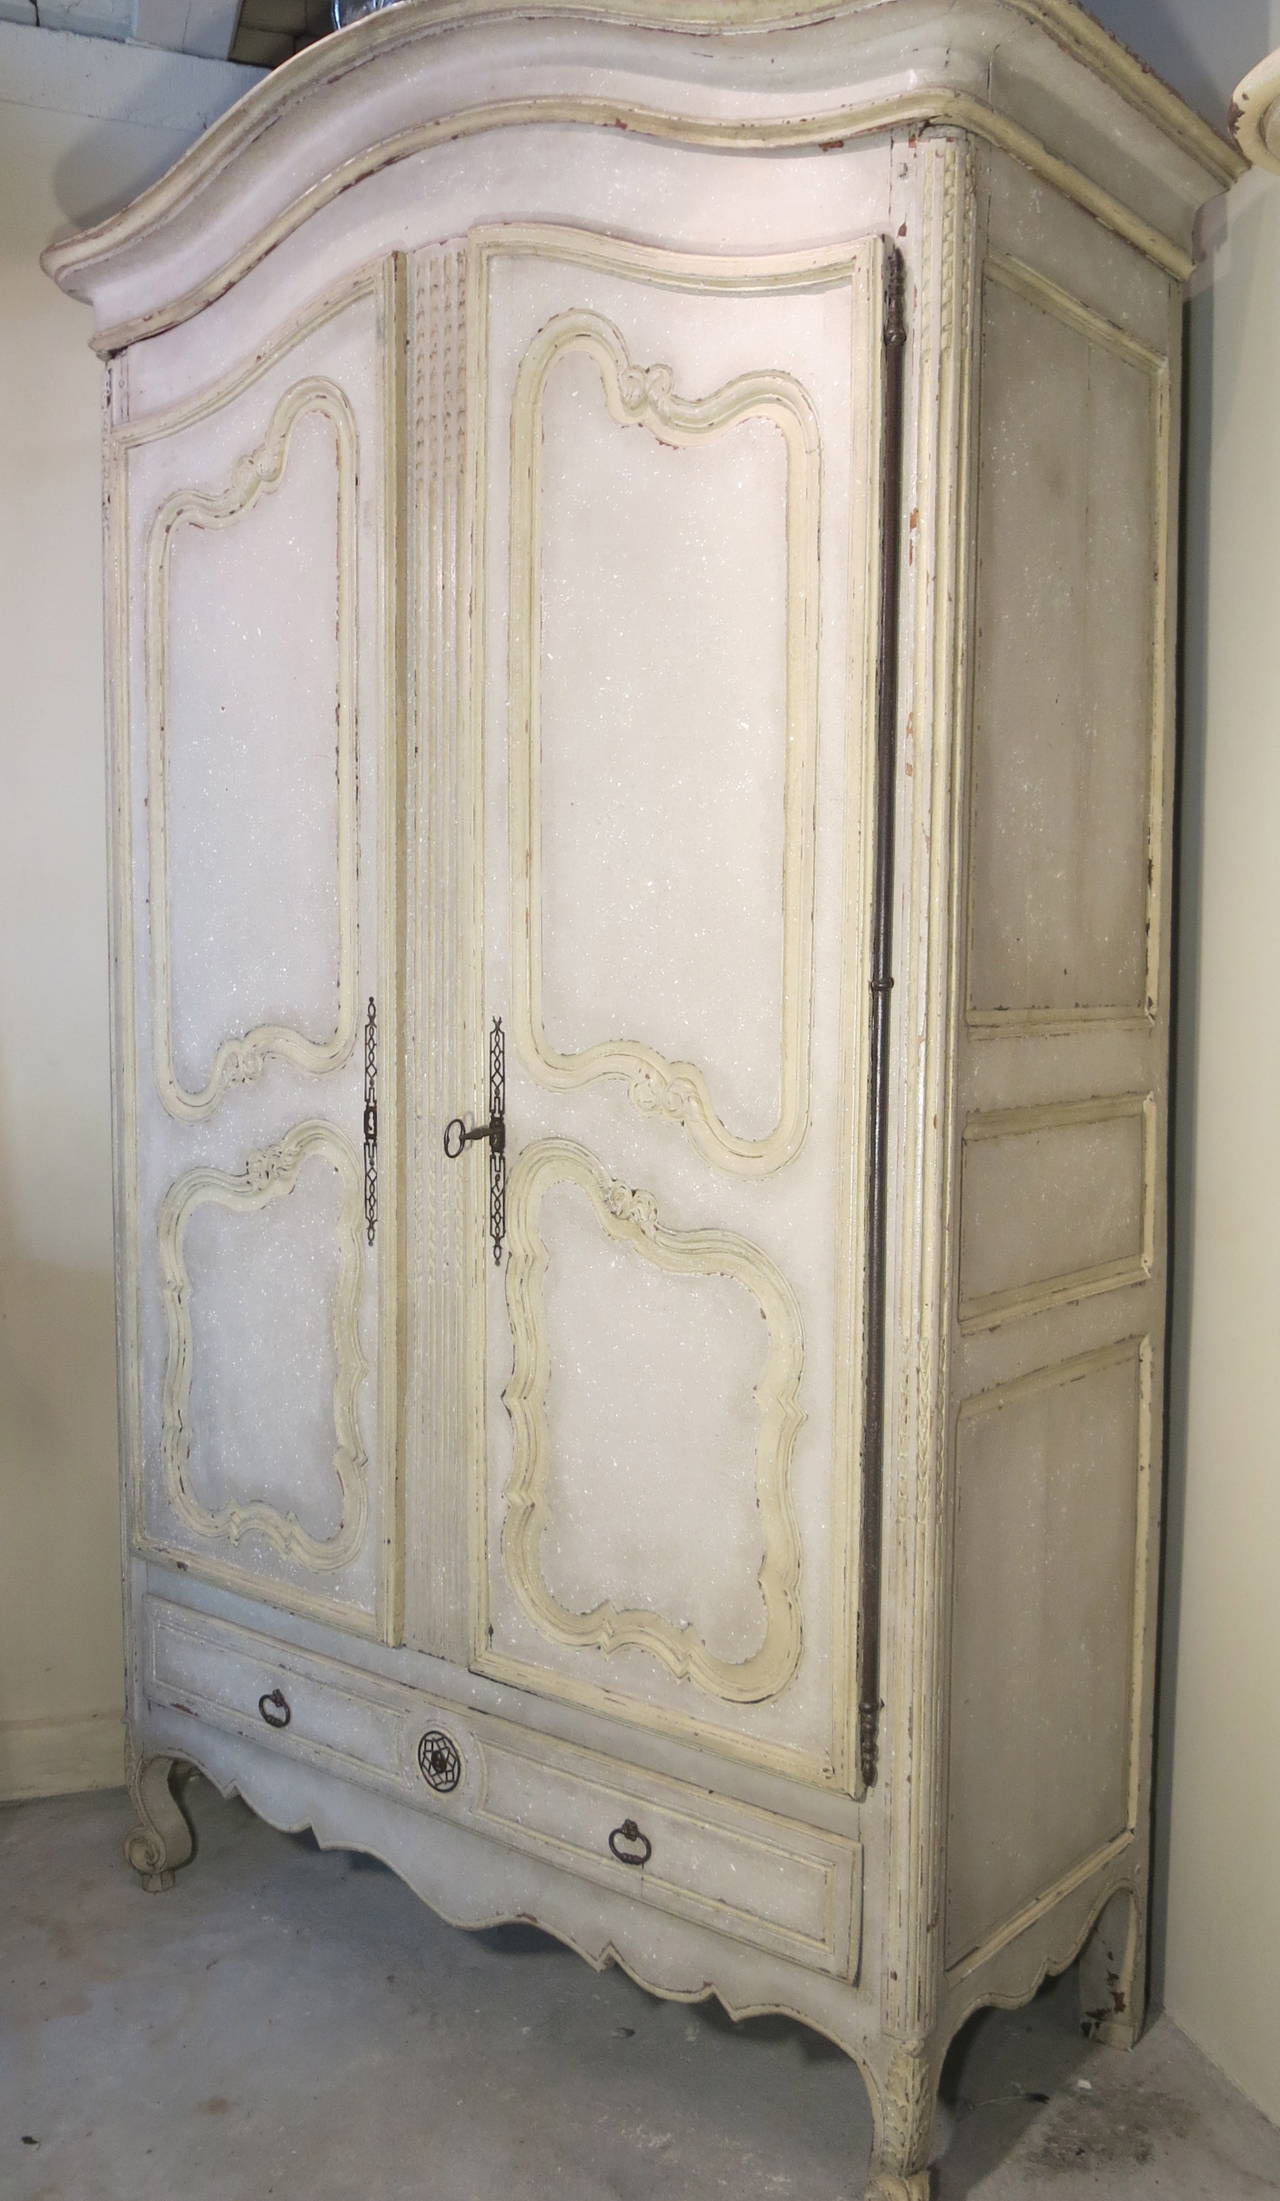 Extremely rare grand antique French period Louis XV walnut armoire, with curved bonnet, curved doors, rare drawer at the bottom, original grand pewter hinges and hardware and scalloped skirt from Provence.